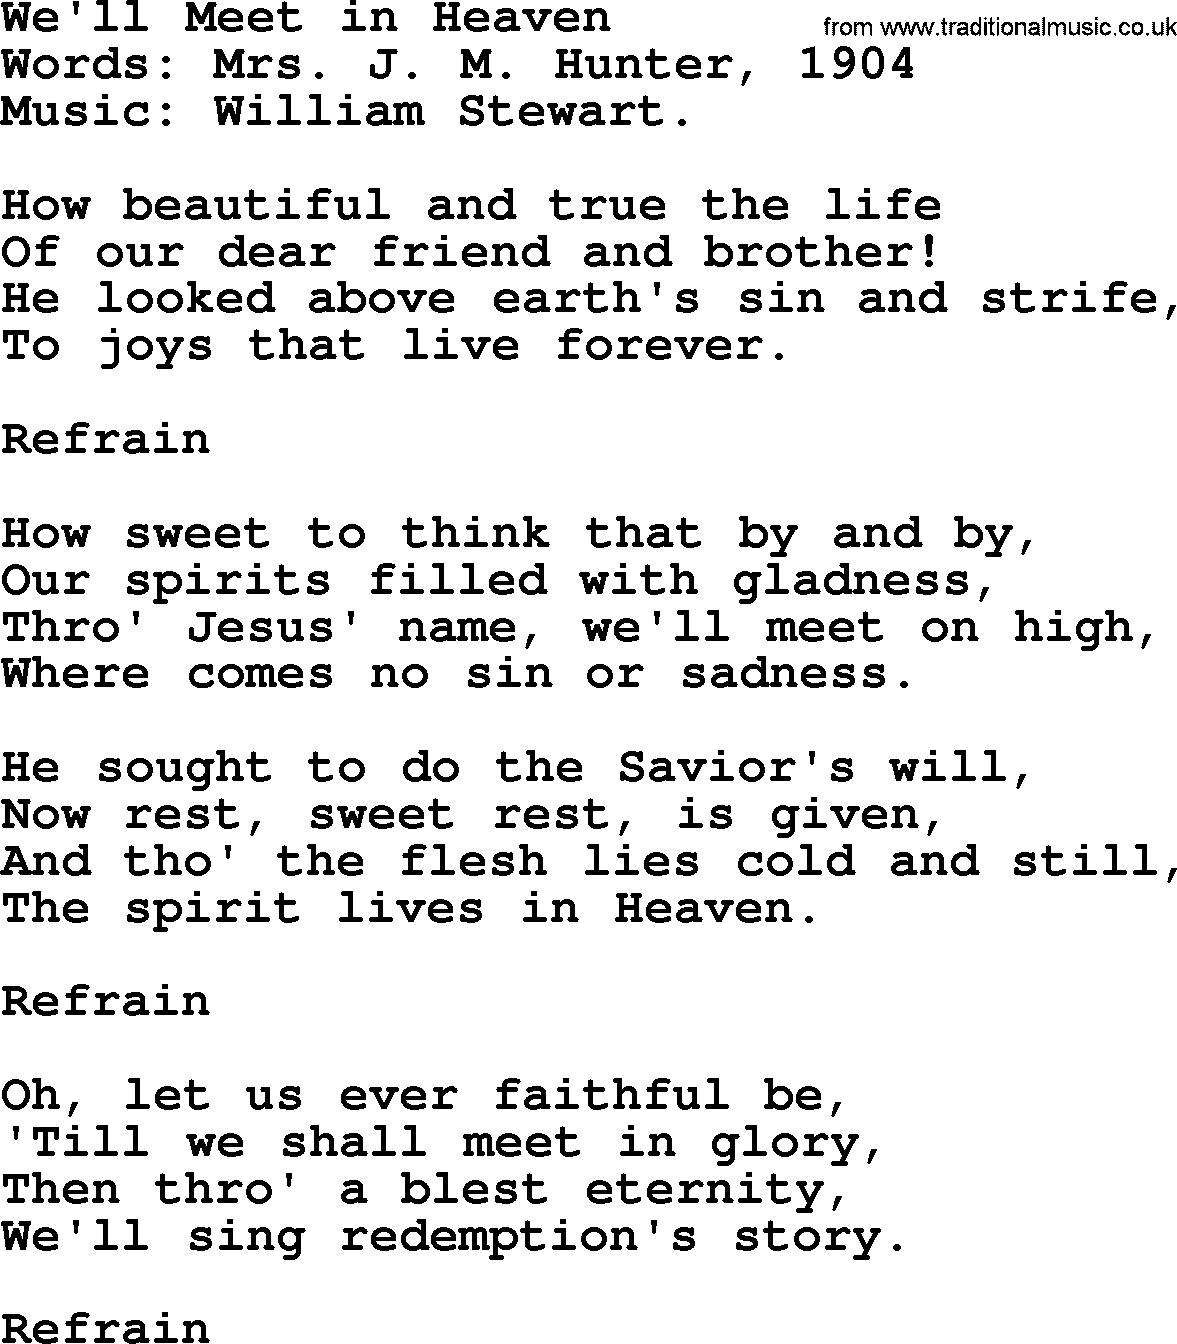 Songs and Hymns about Heaven: We'll Meet In Heaven lyrics with PDF